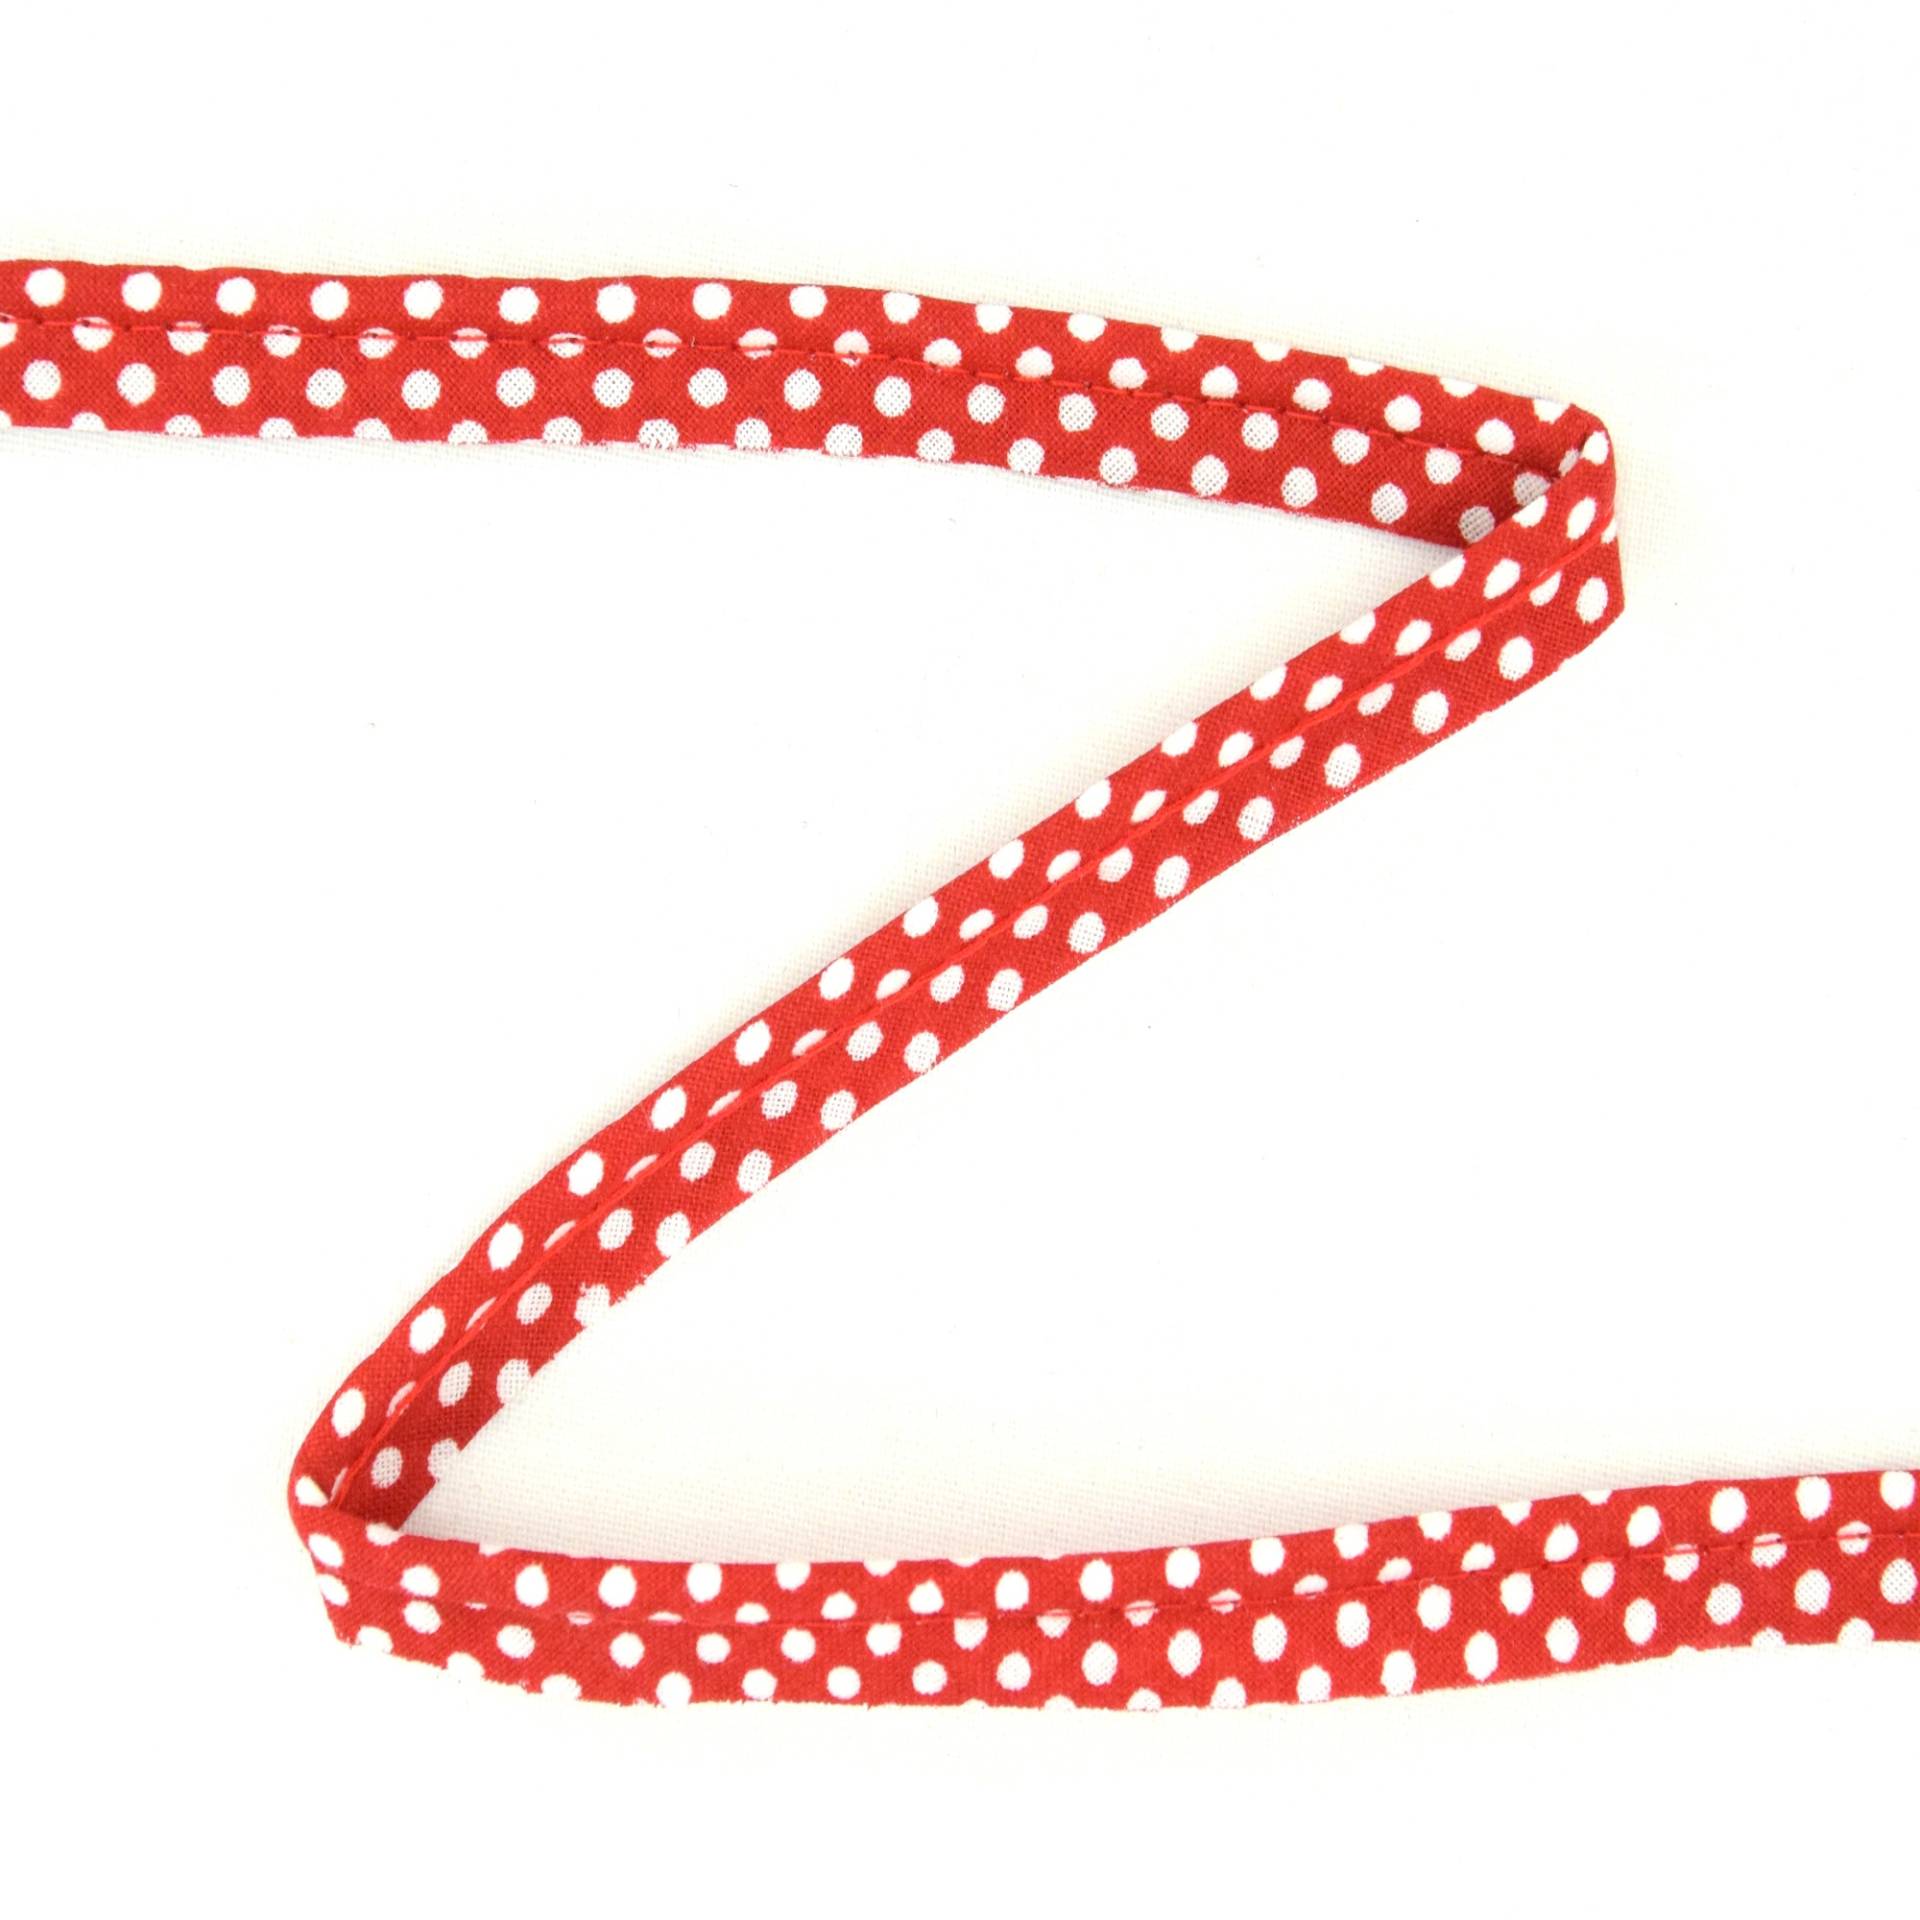 Paspelband Dots, rot-weiss von Stoffe Hemmers